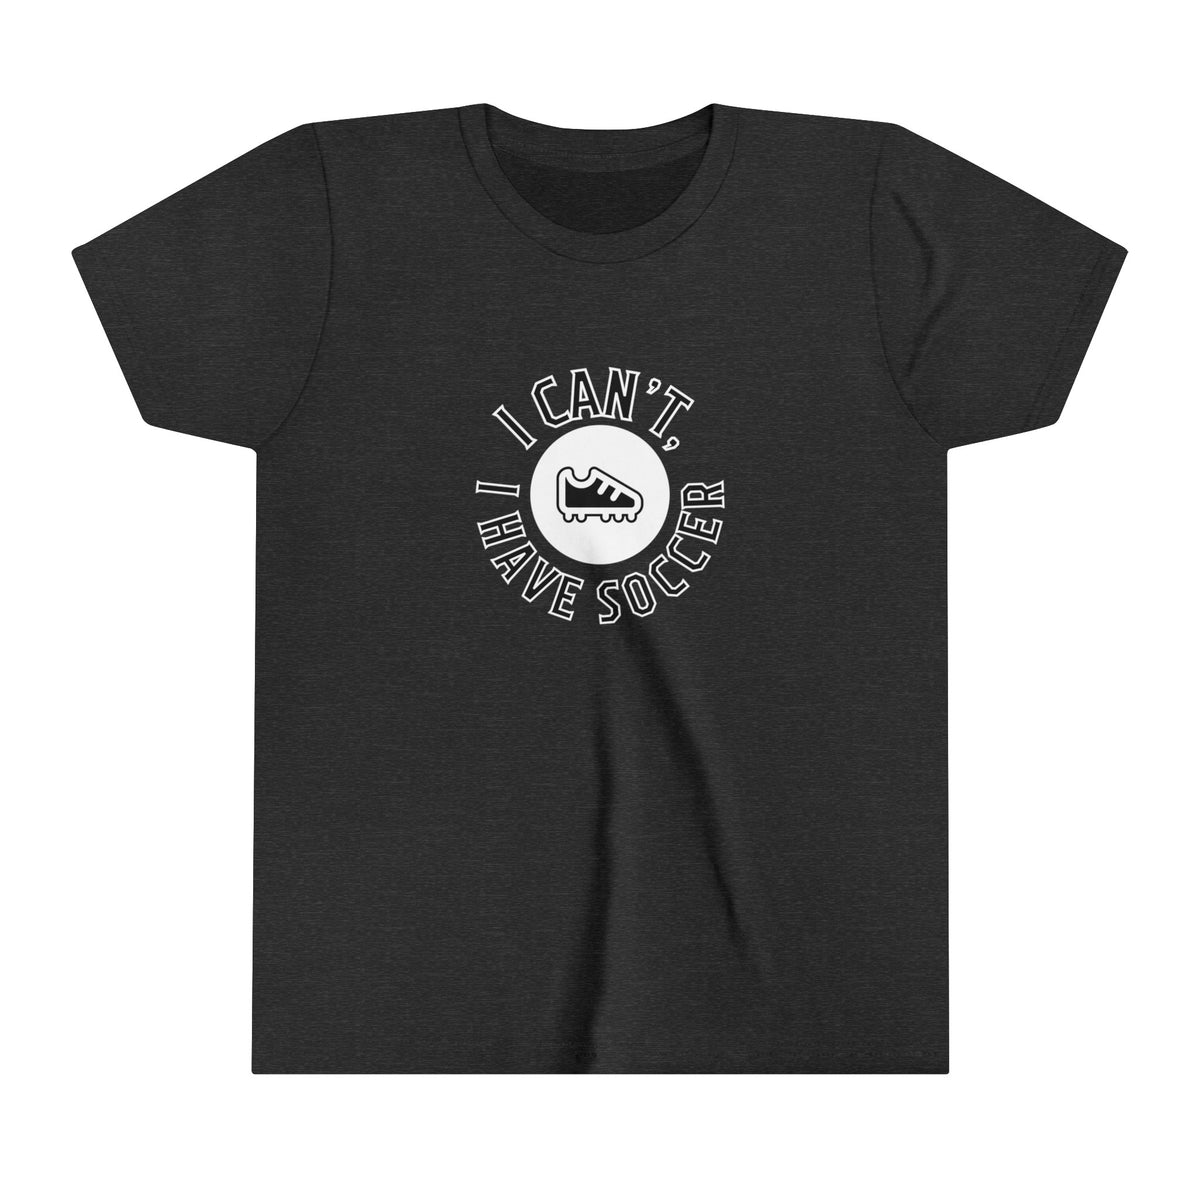 I Can't I Have Soccer Logo Youth T-Shirt